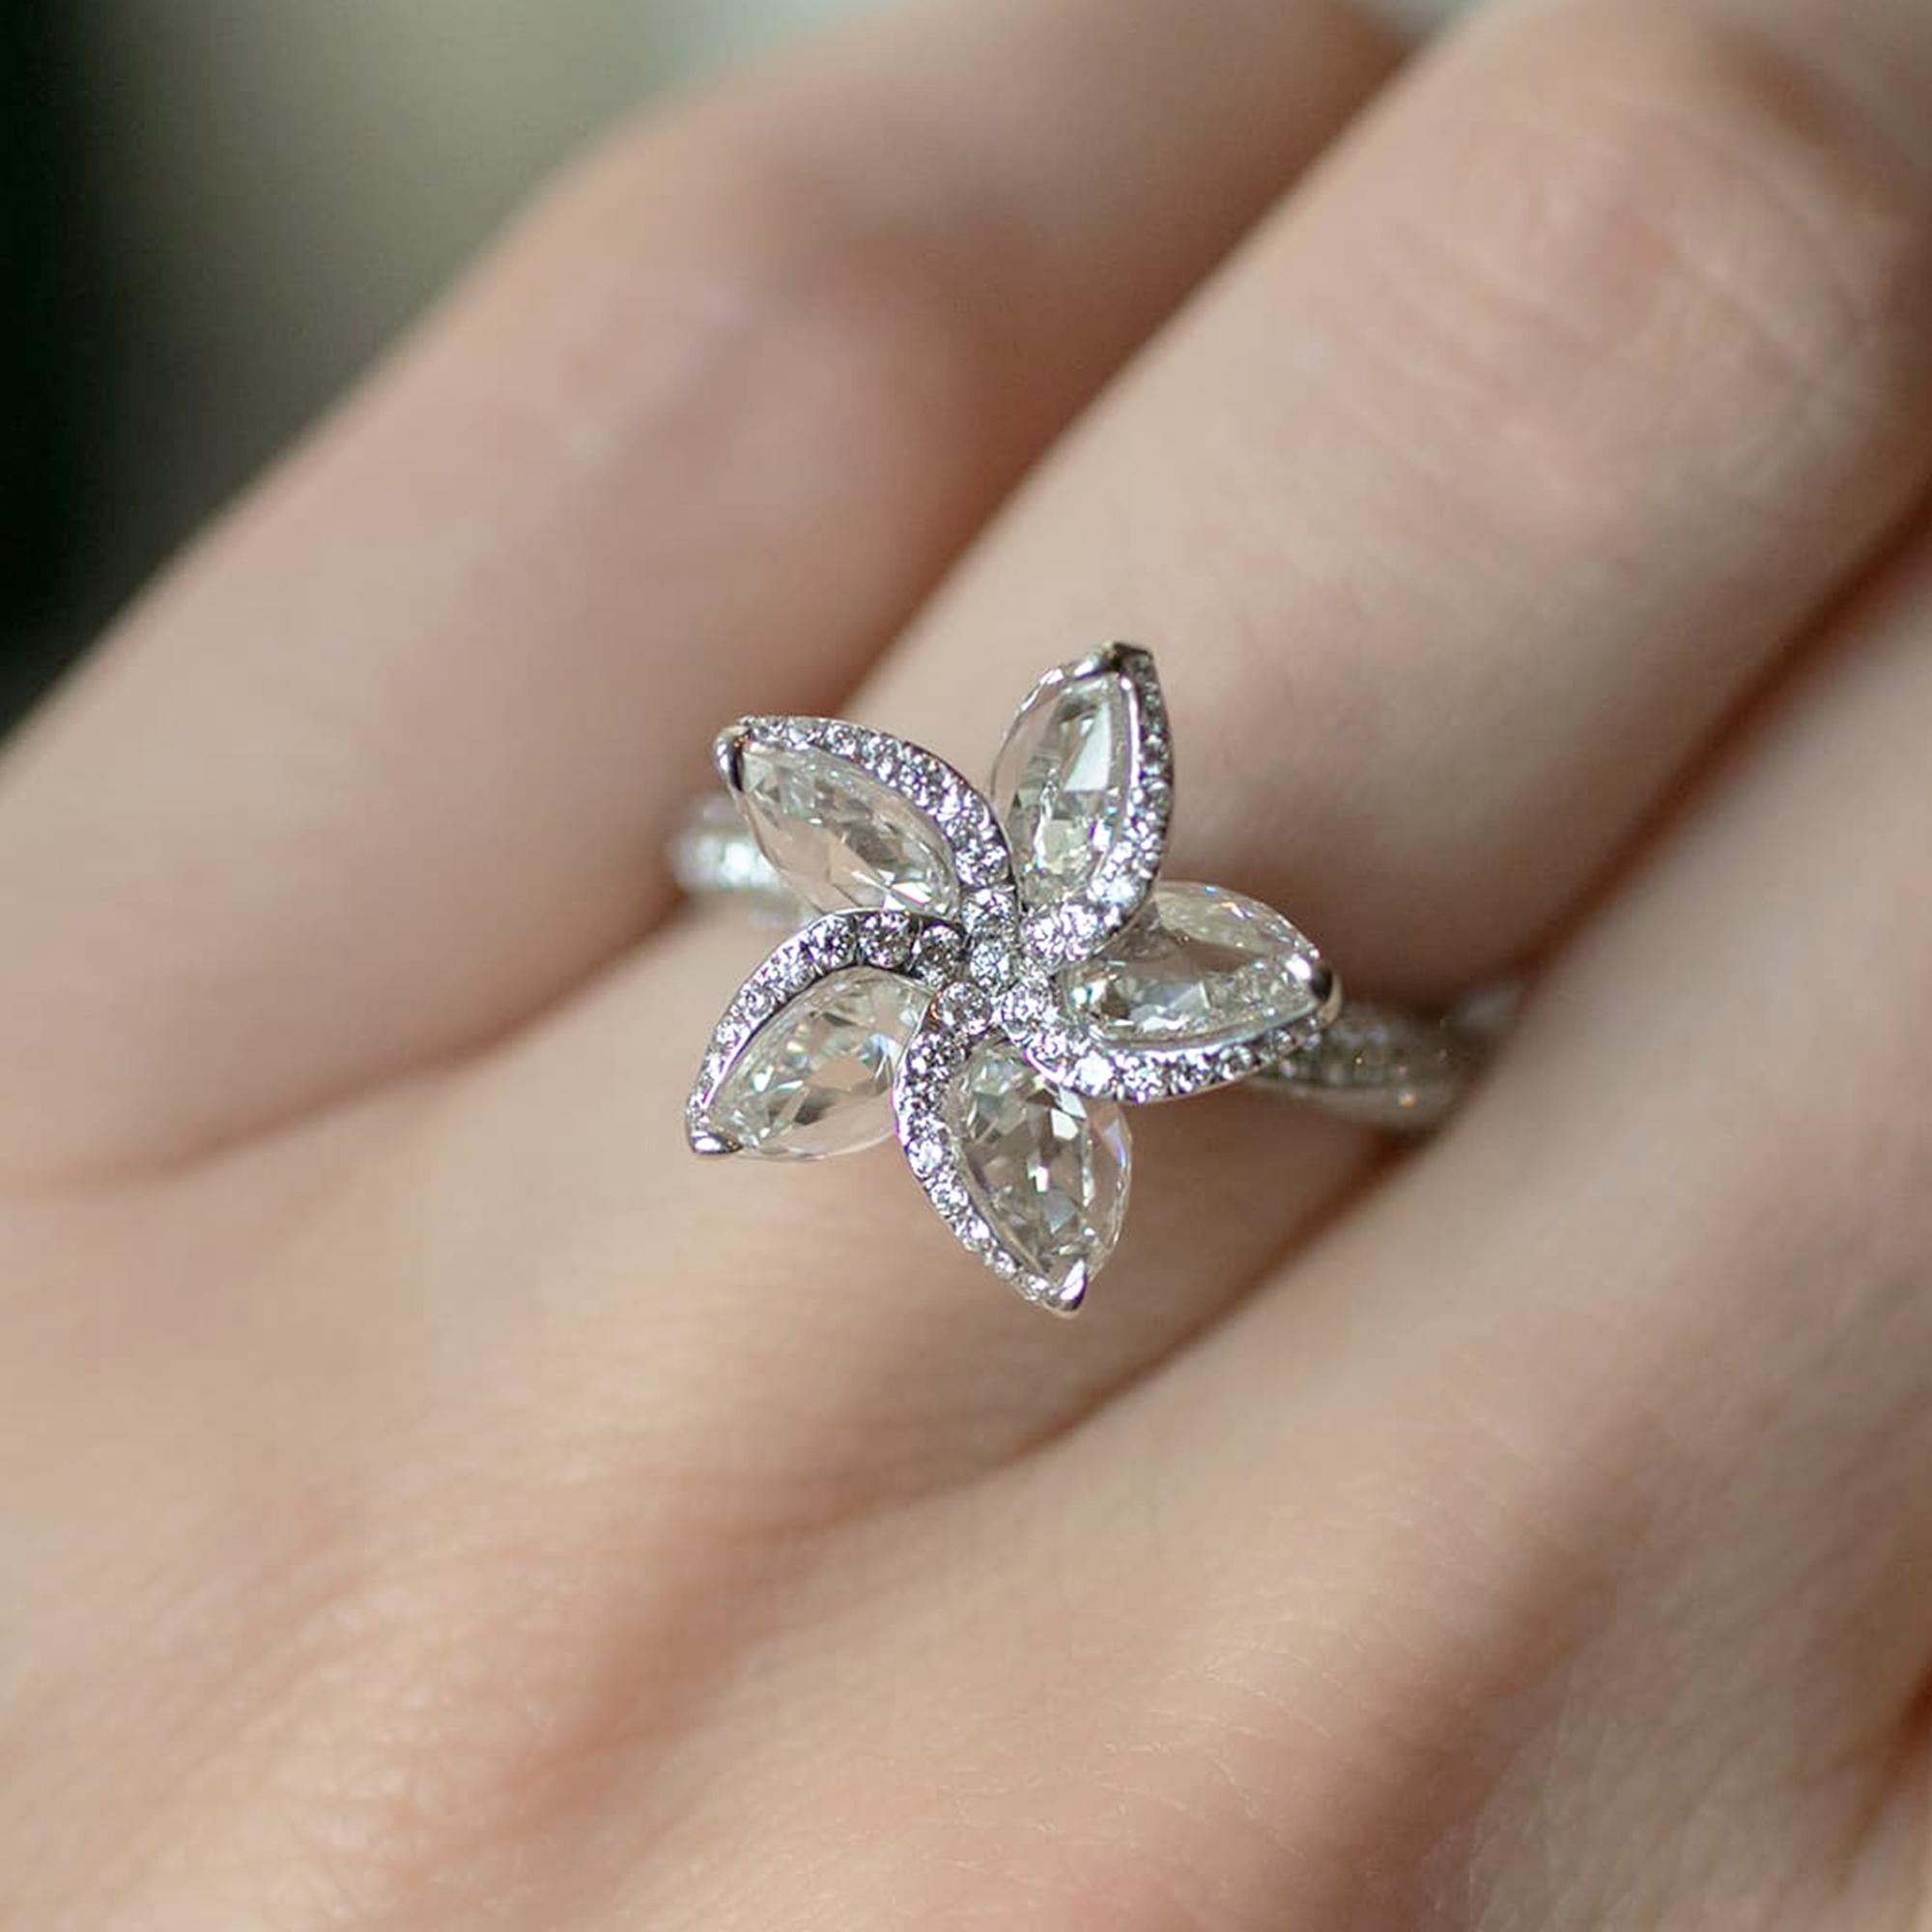 This beautiful floral ring features shimmering pear rose cut diamonds and brilliant round in pave setting resembling petals, with a diamond studded shank crafted in 18 karat white gold.

The ring is studded with 141 round and 5 rose cut pear